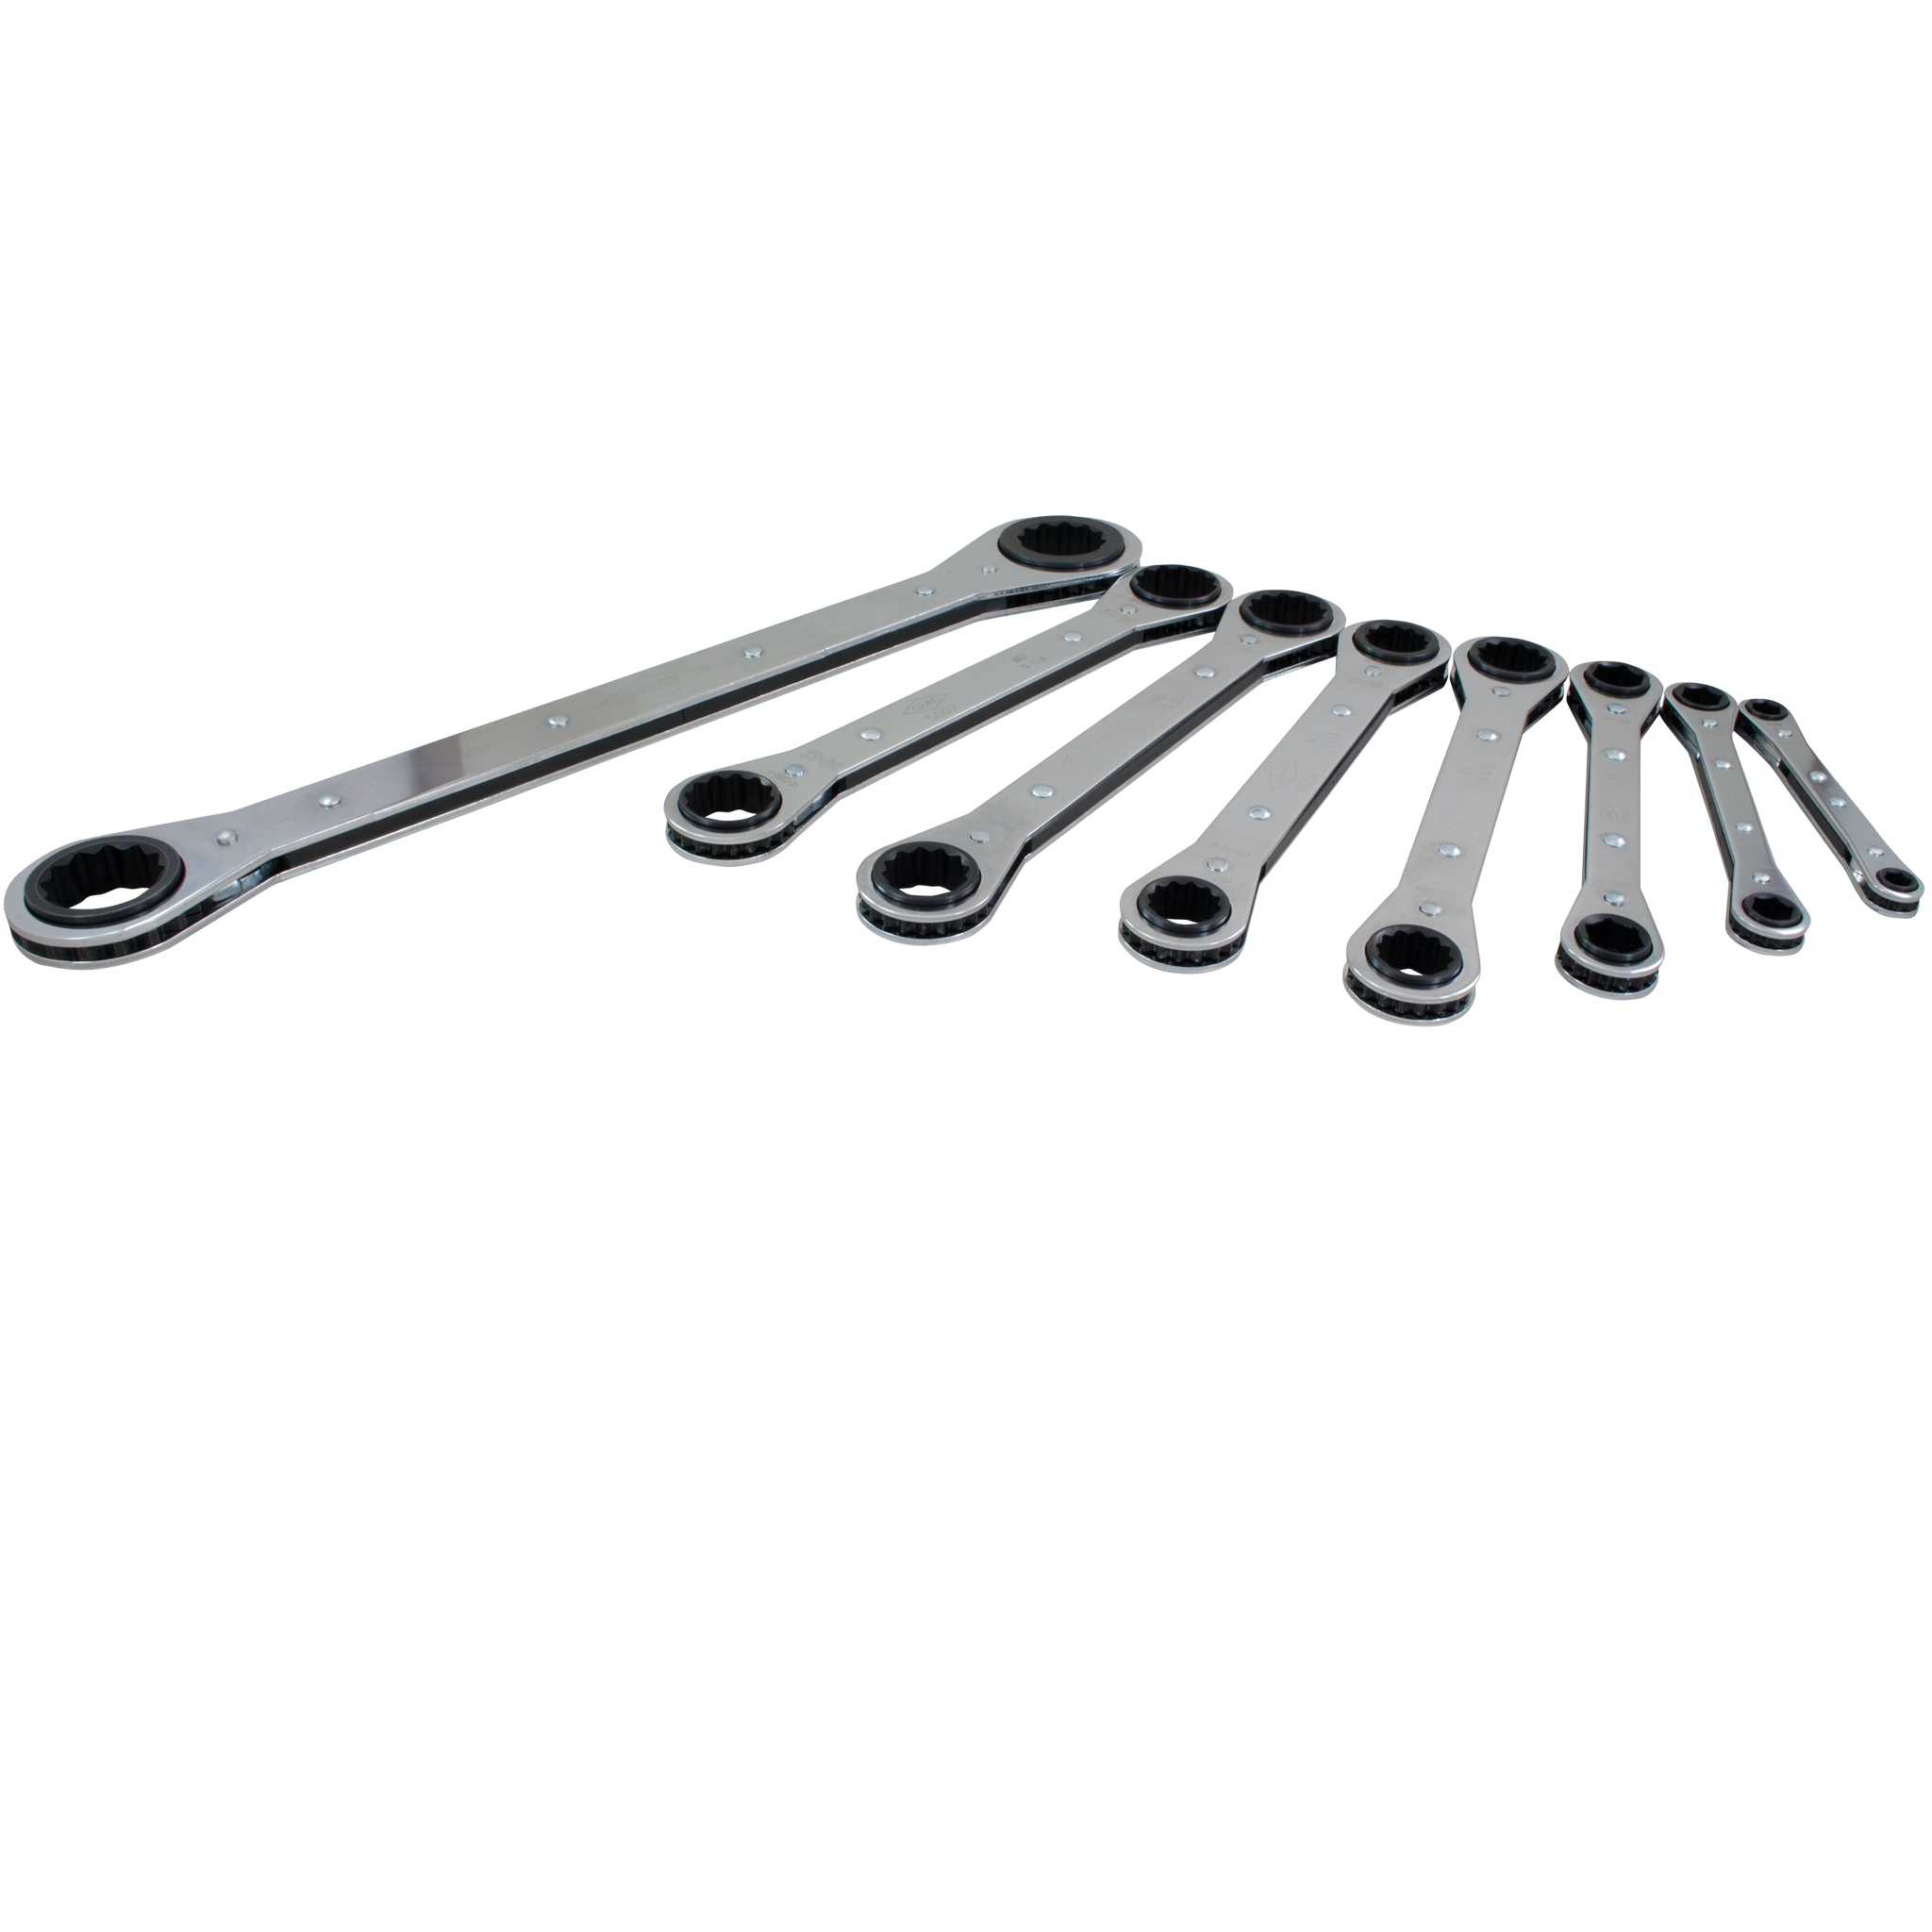 8 Piece 6 & 12 Point SAE Flat Ratcheting Box End Wrench Set